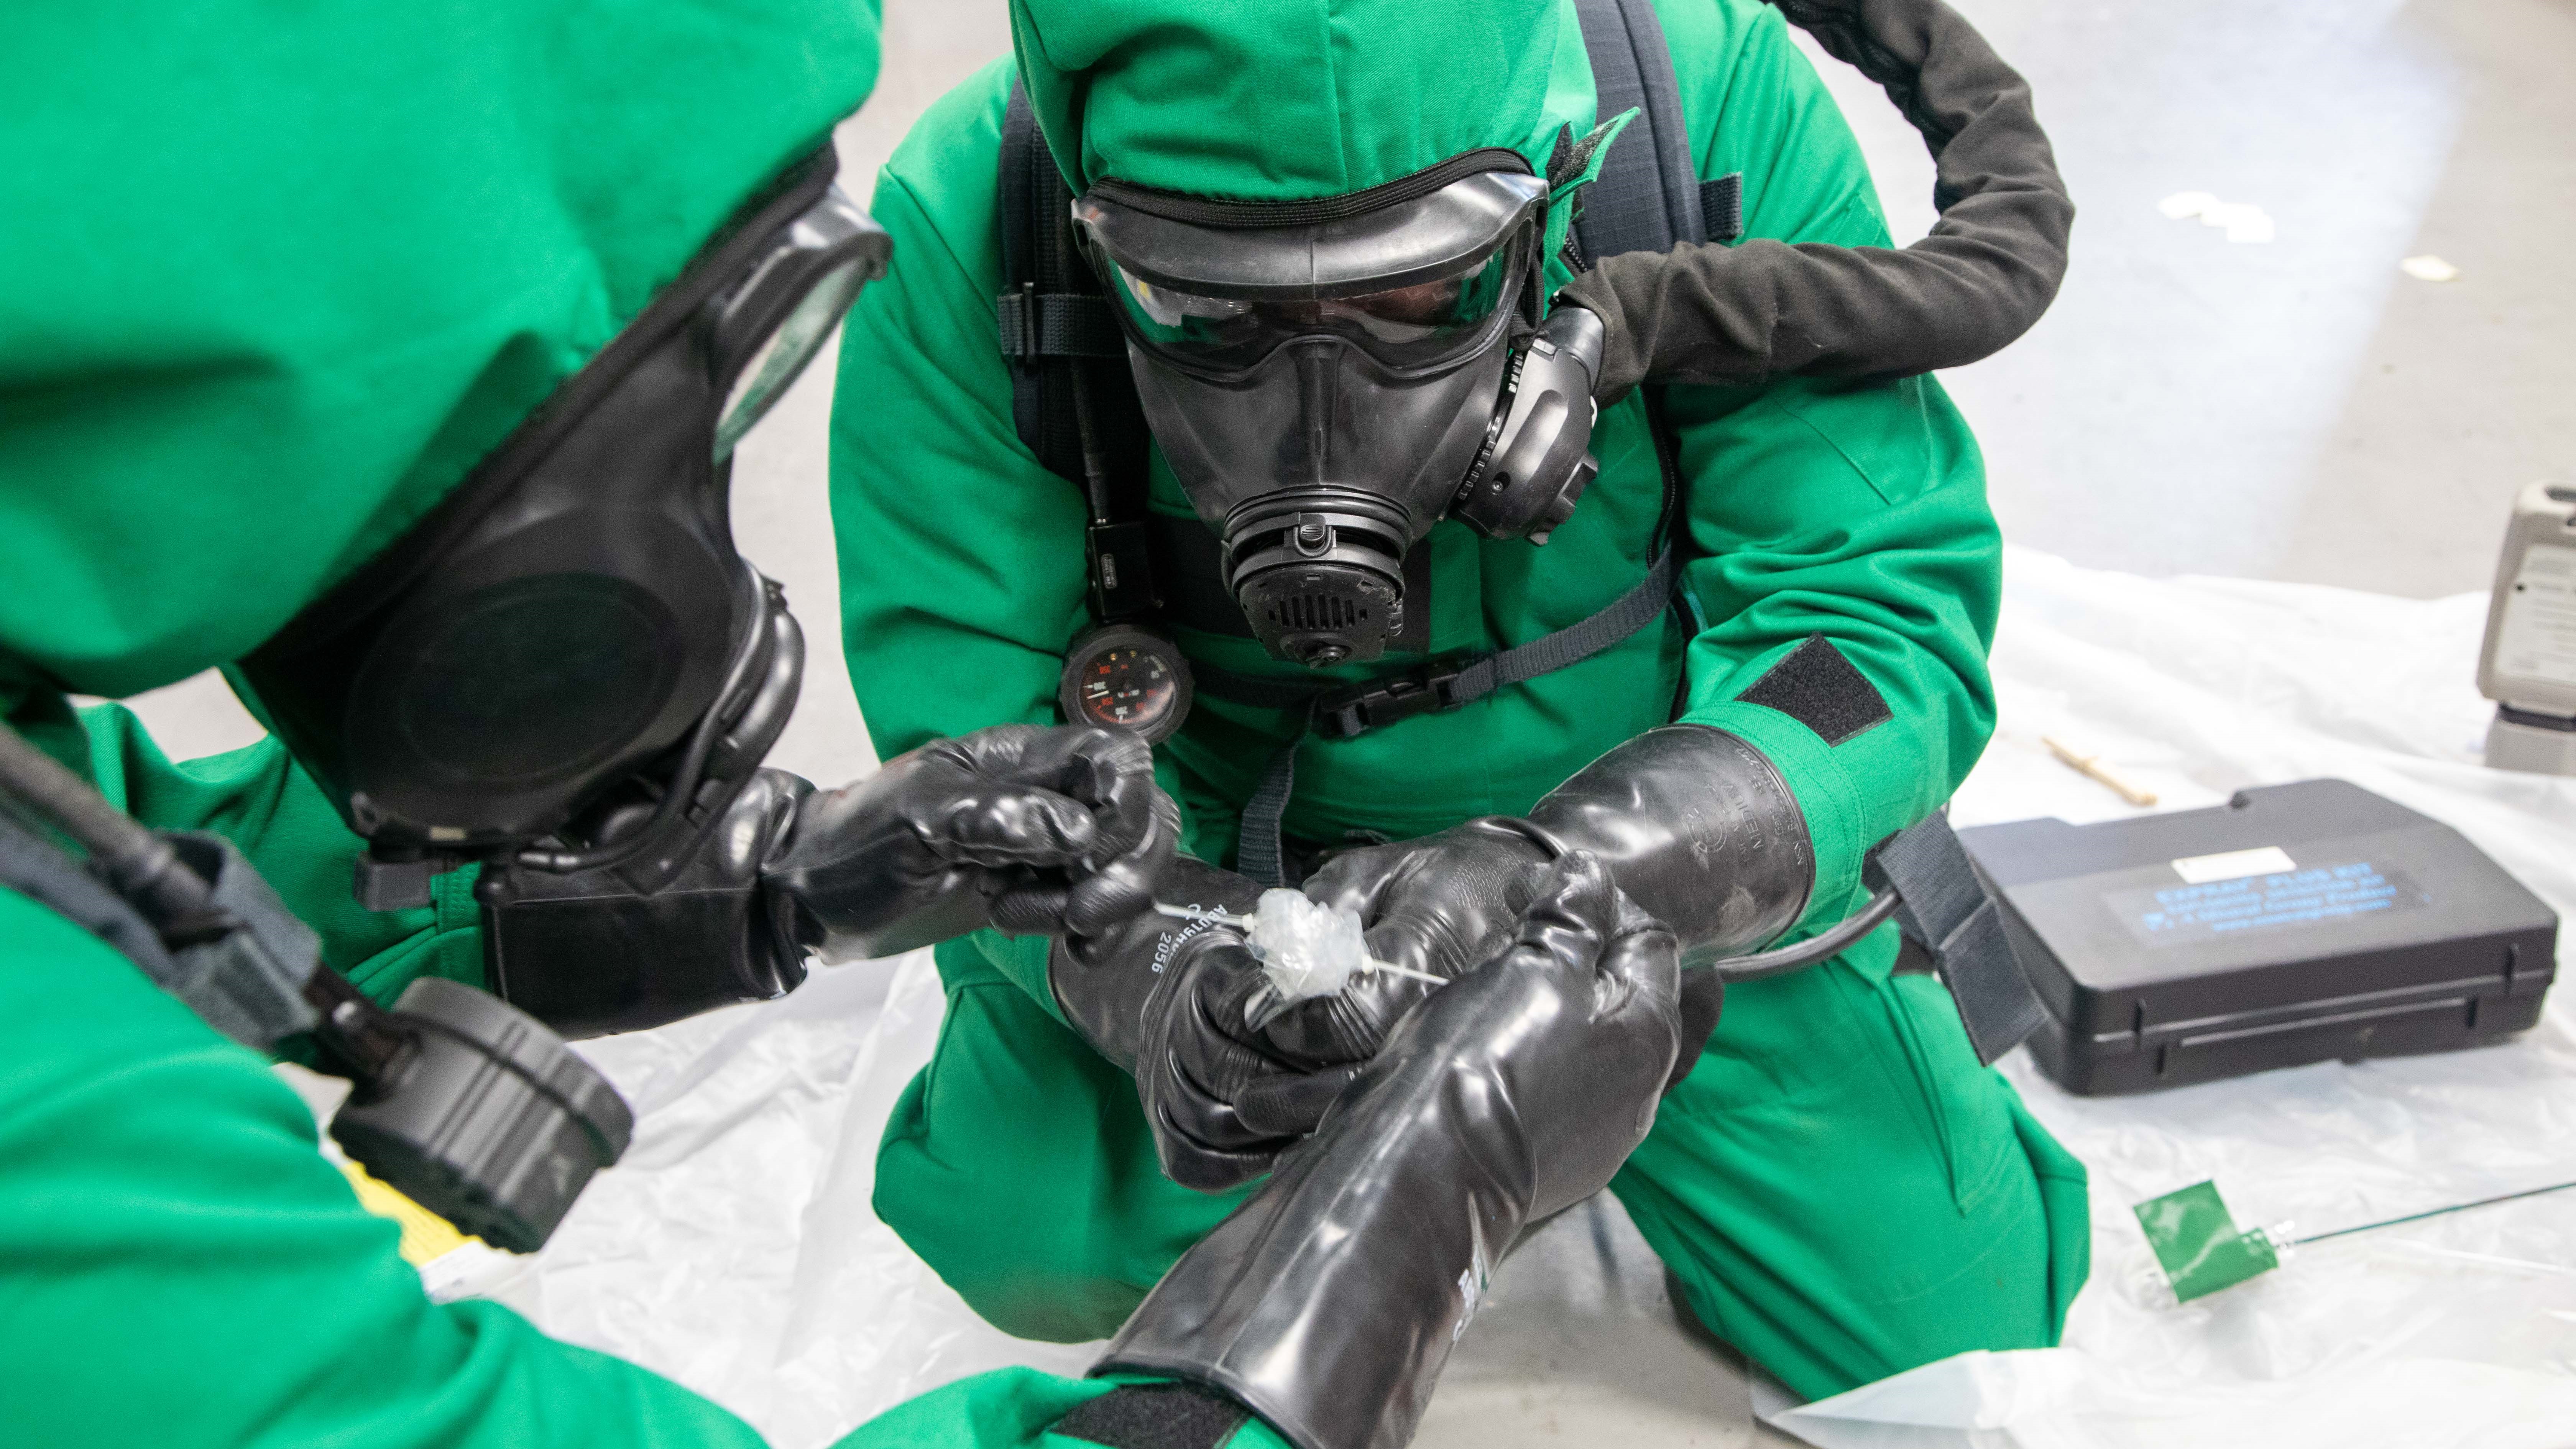 EU countries sign up to EDA’s joint procurement for CBRN and soldier equipment